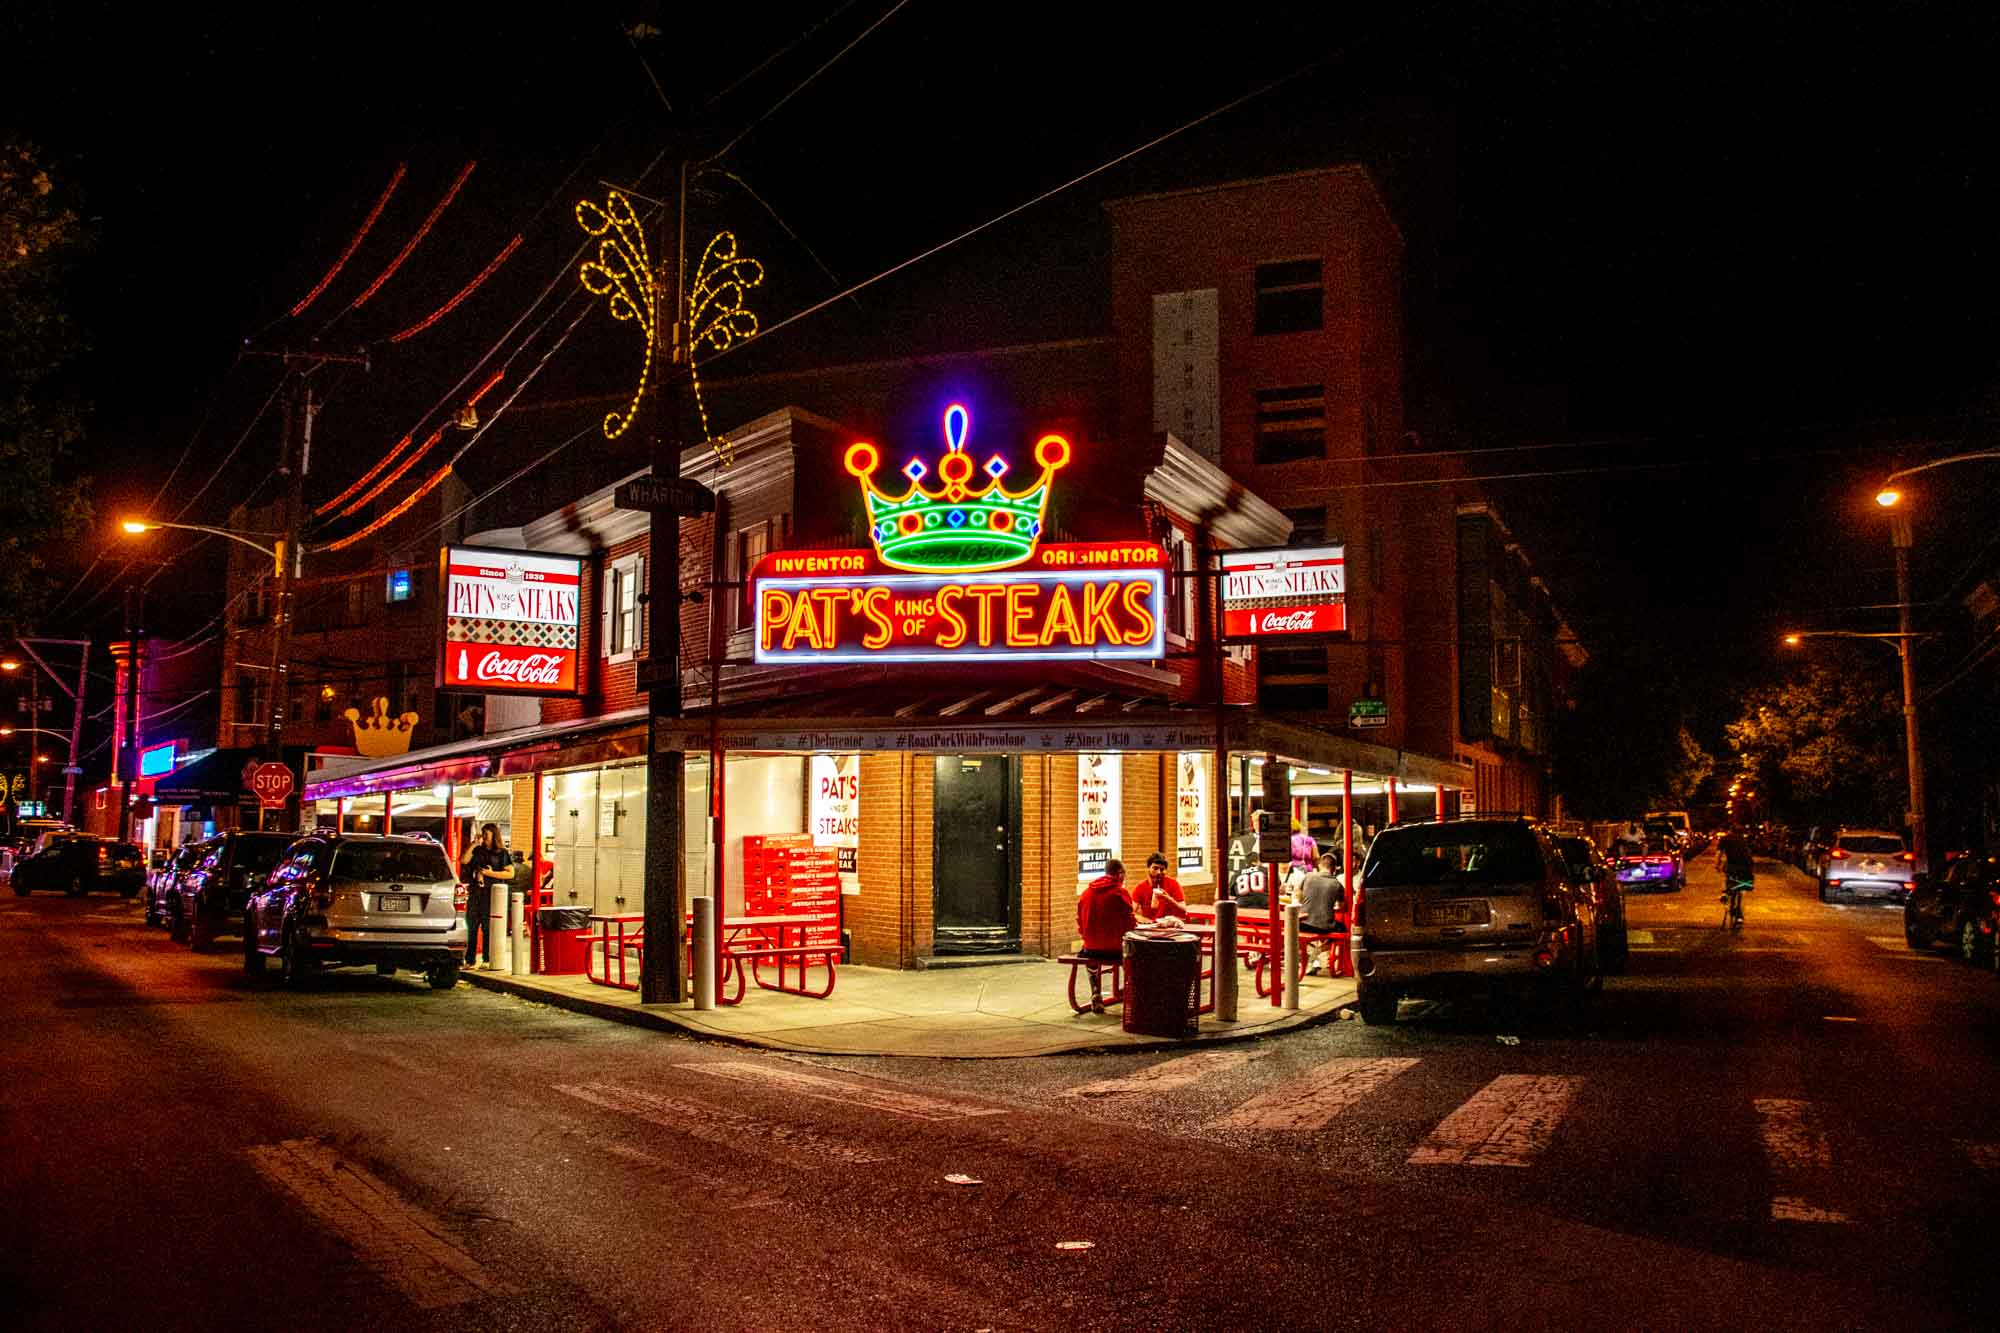 Exterior of Pat's King of Steaks at night